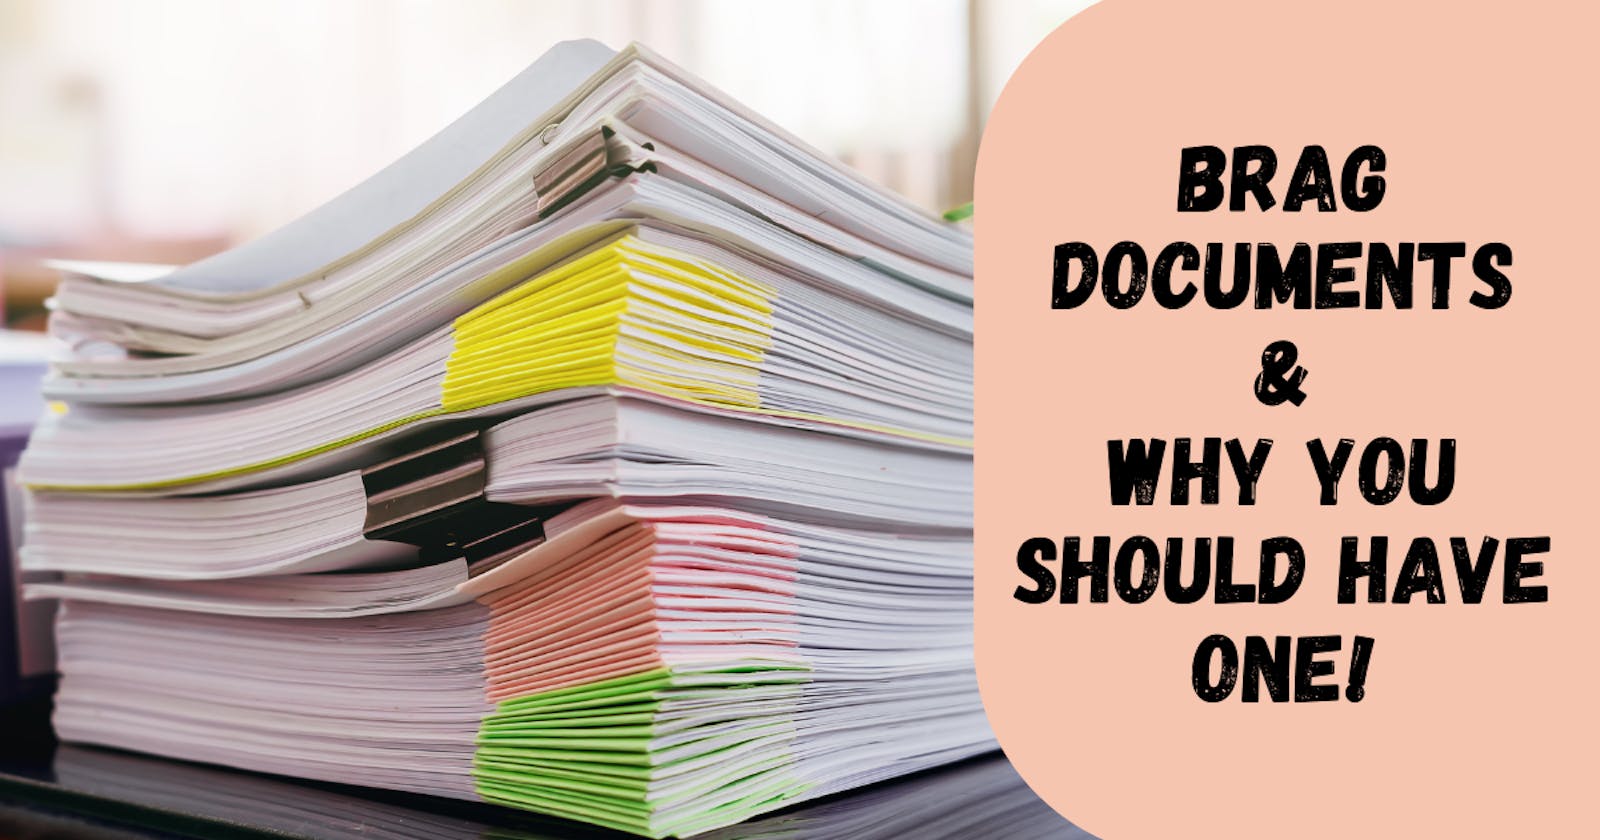 Brag documents & why you should have one!